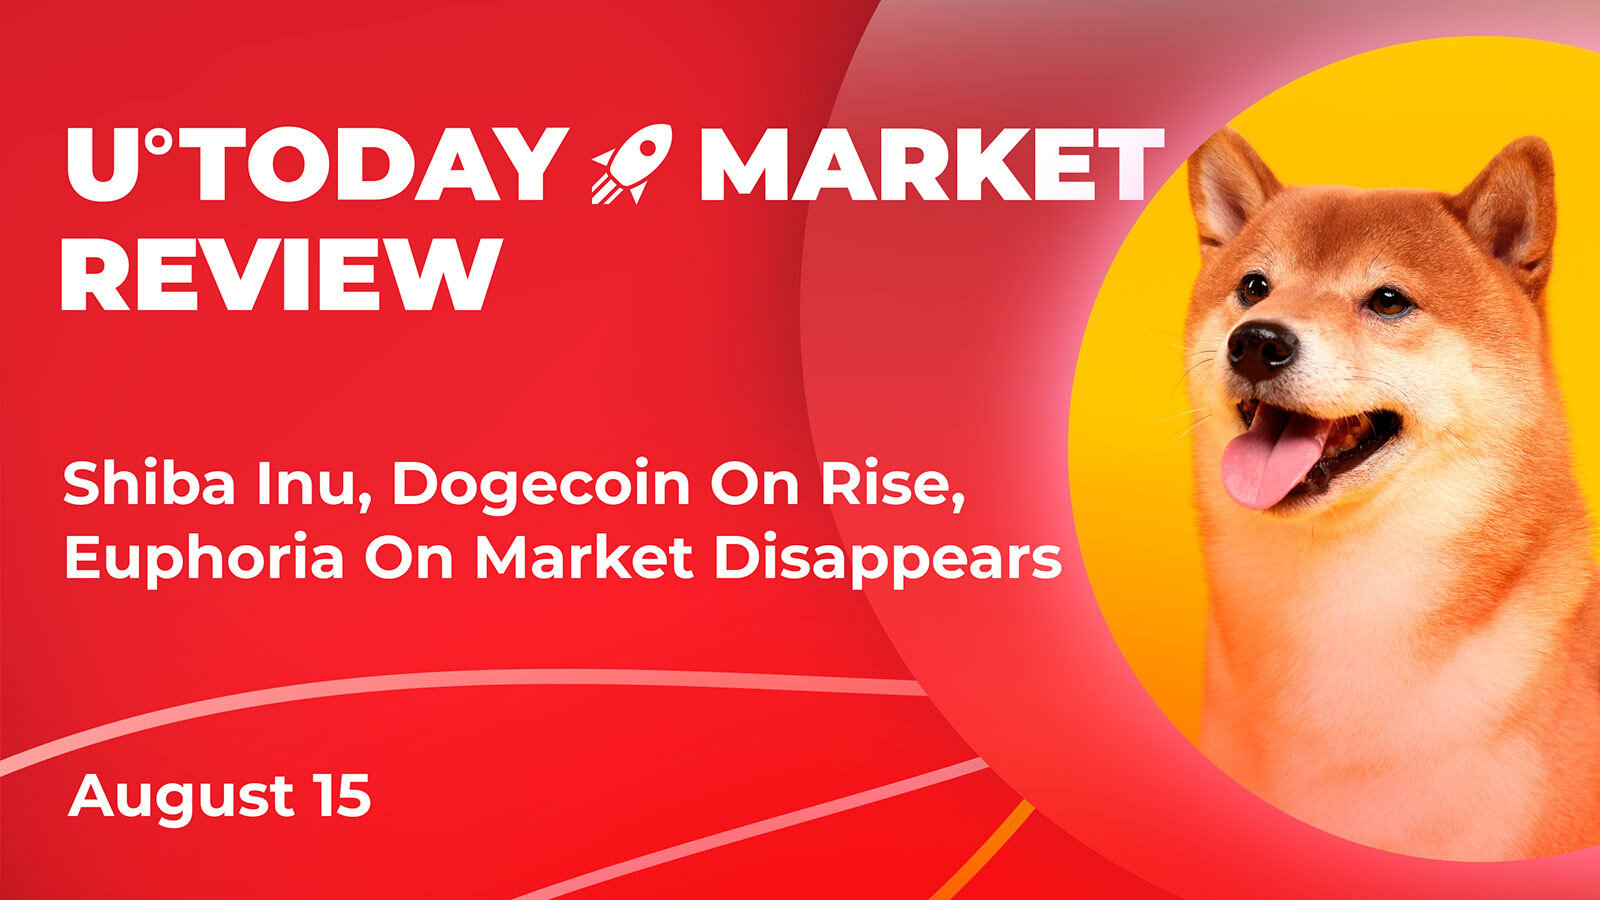 Shiba Inu, Dogecoin On Rise While Euphoria On Market Disappears: Crypto Market Review, August 15